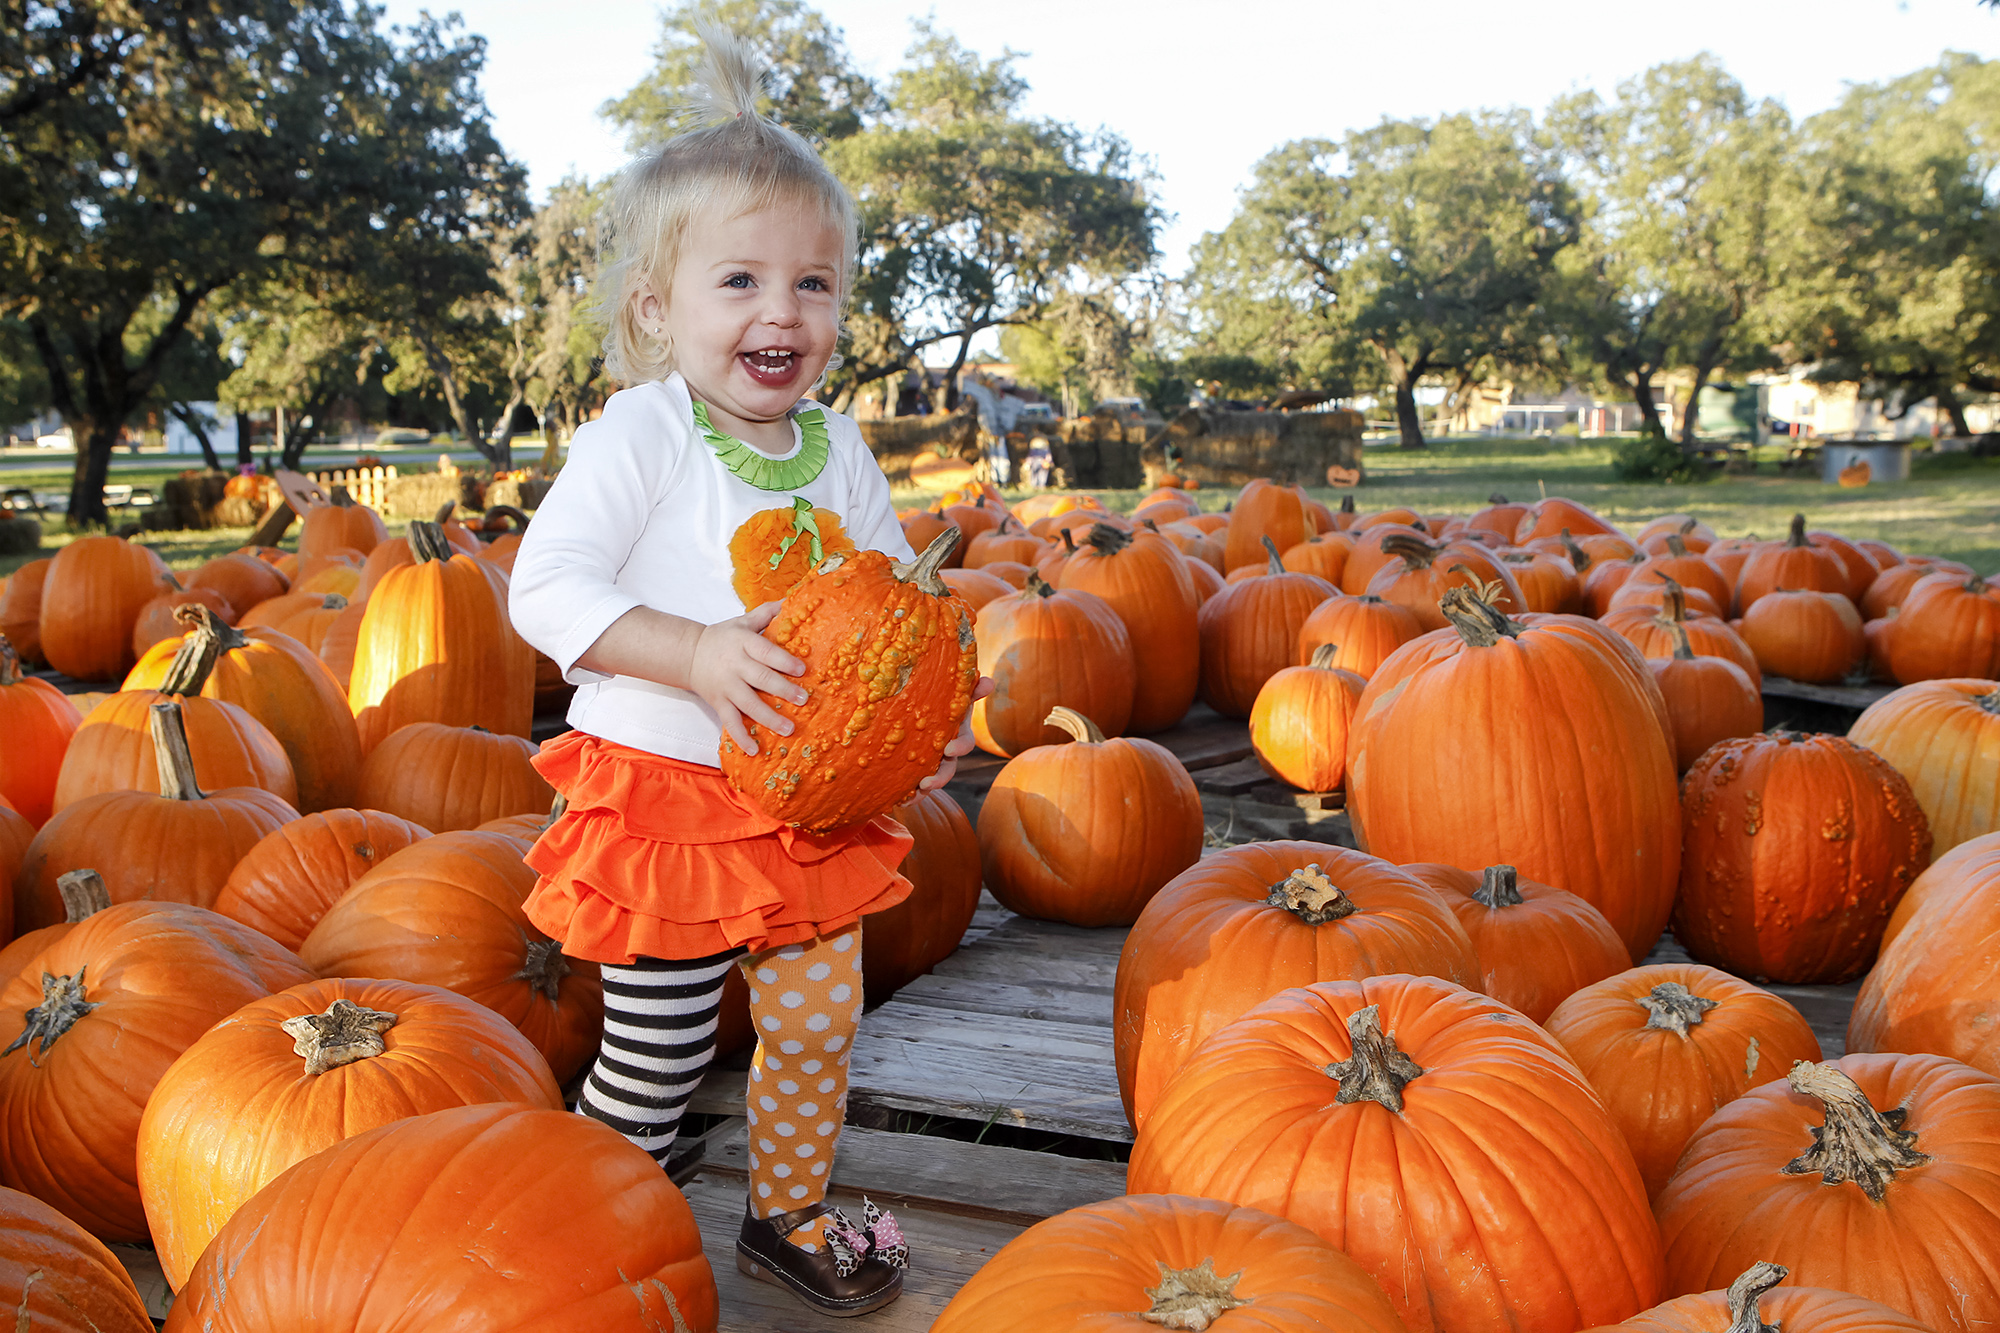 Pumpkin patch season has arrived. Here are 5 places you can visit in